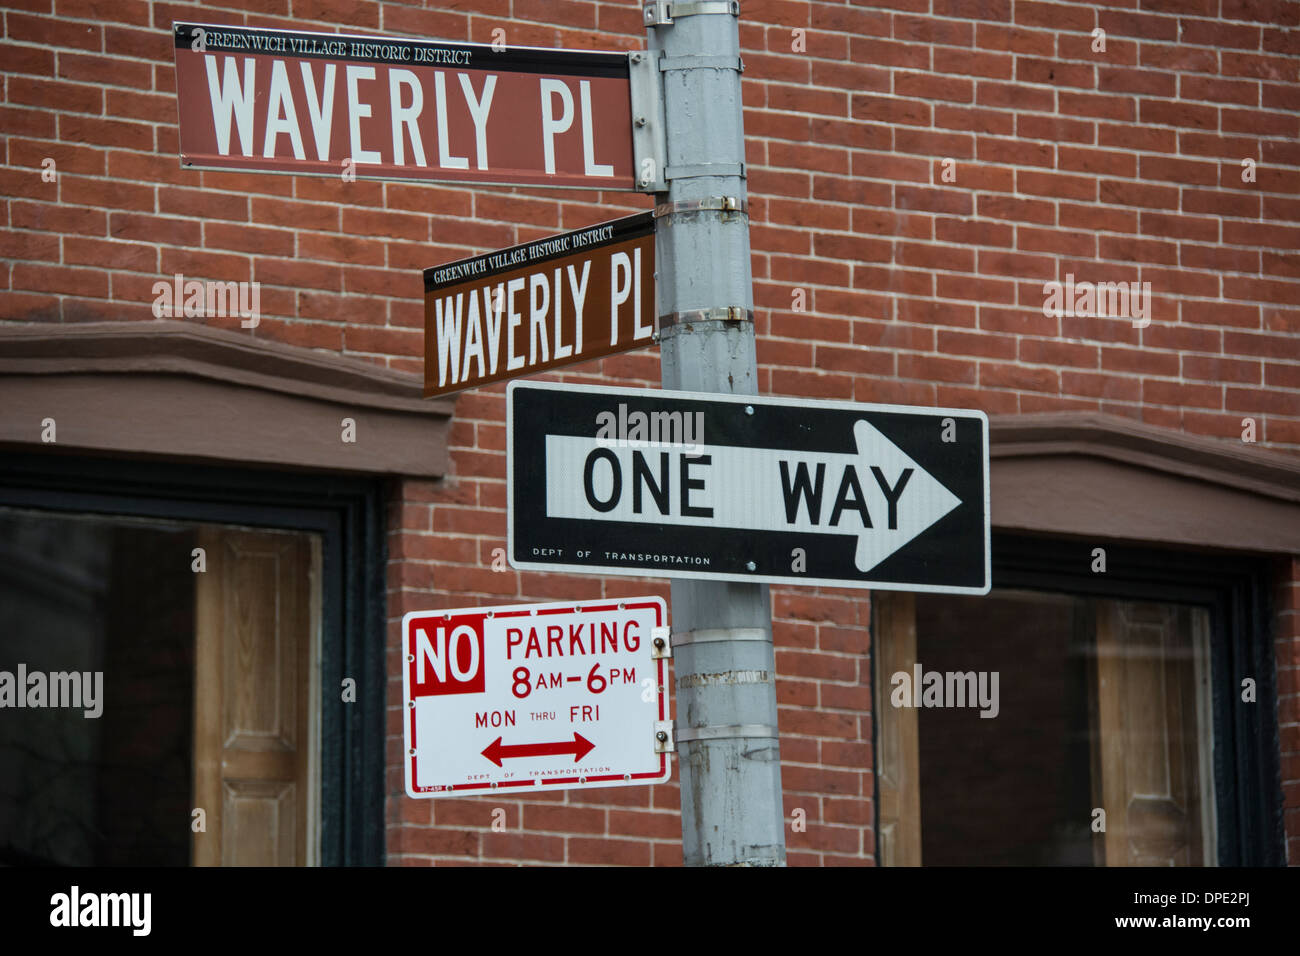 Street Signs at the corner of Waverly Place and Waverly Place in Greenwich Village, New York City, USA Stock Photo